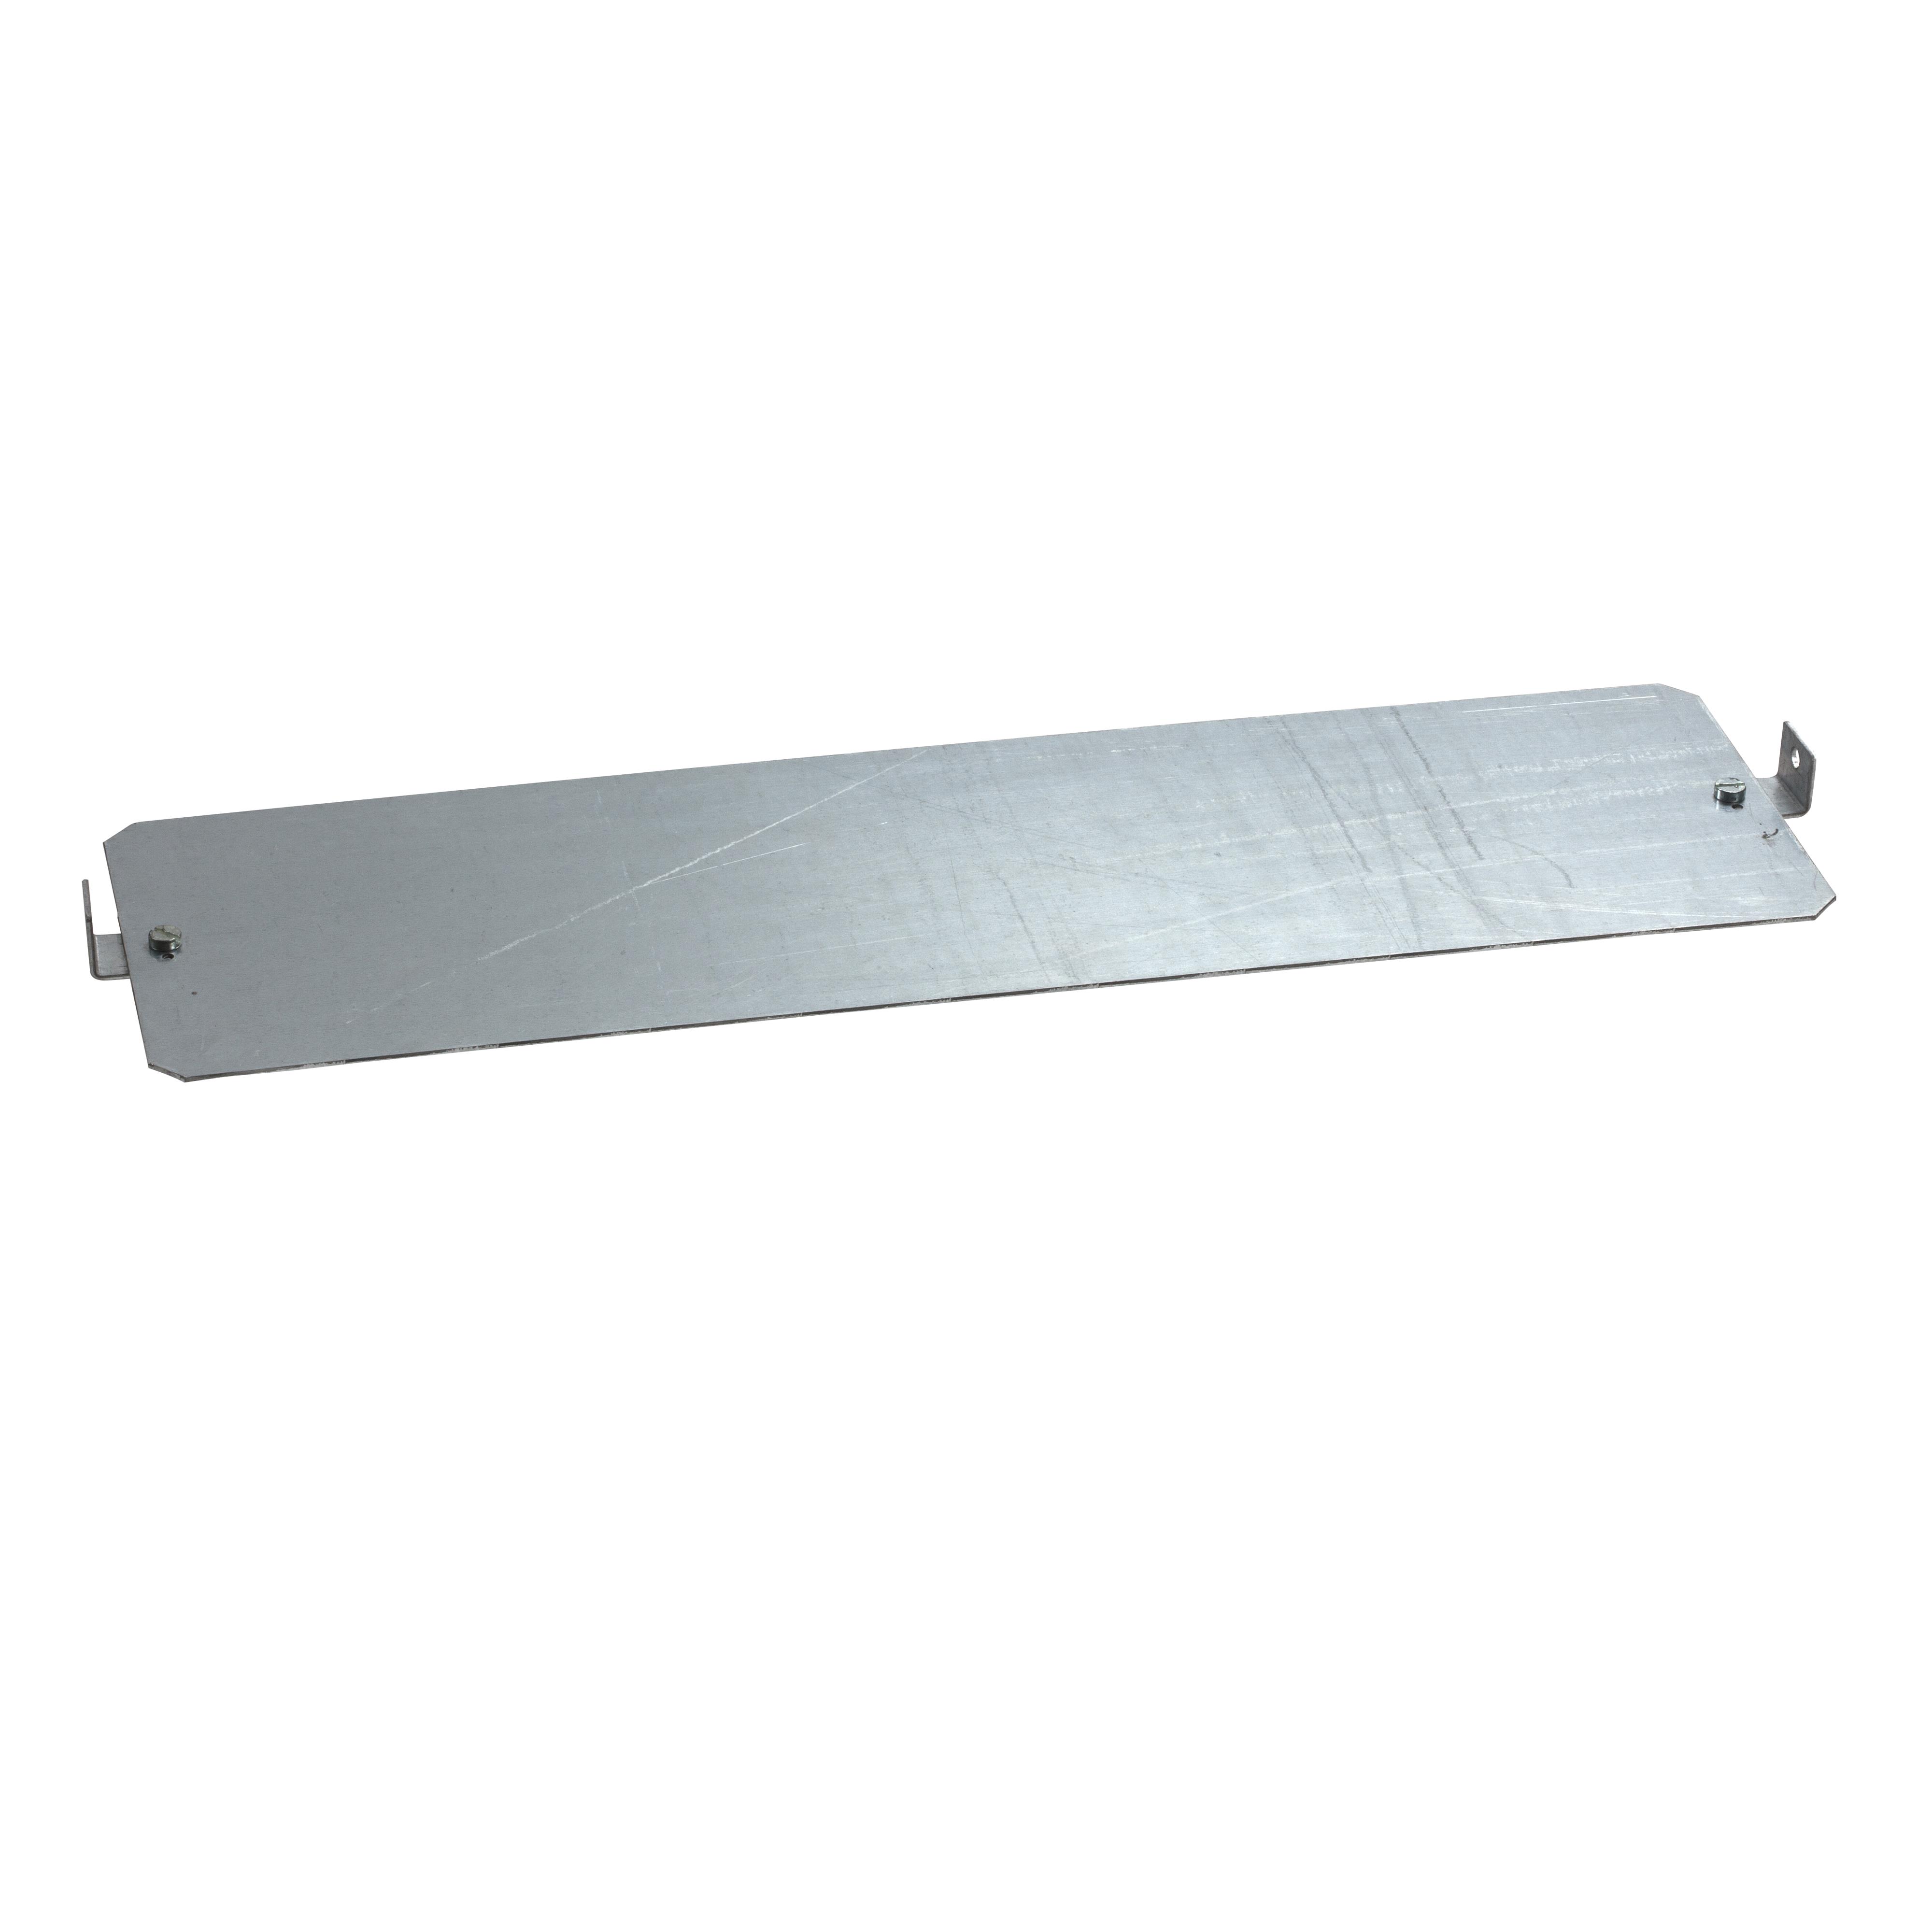 【NSYPMP600DLM】DLM MOUNTING PLATE WIDTH 600